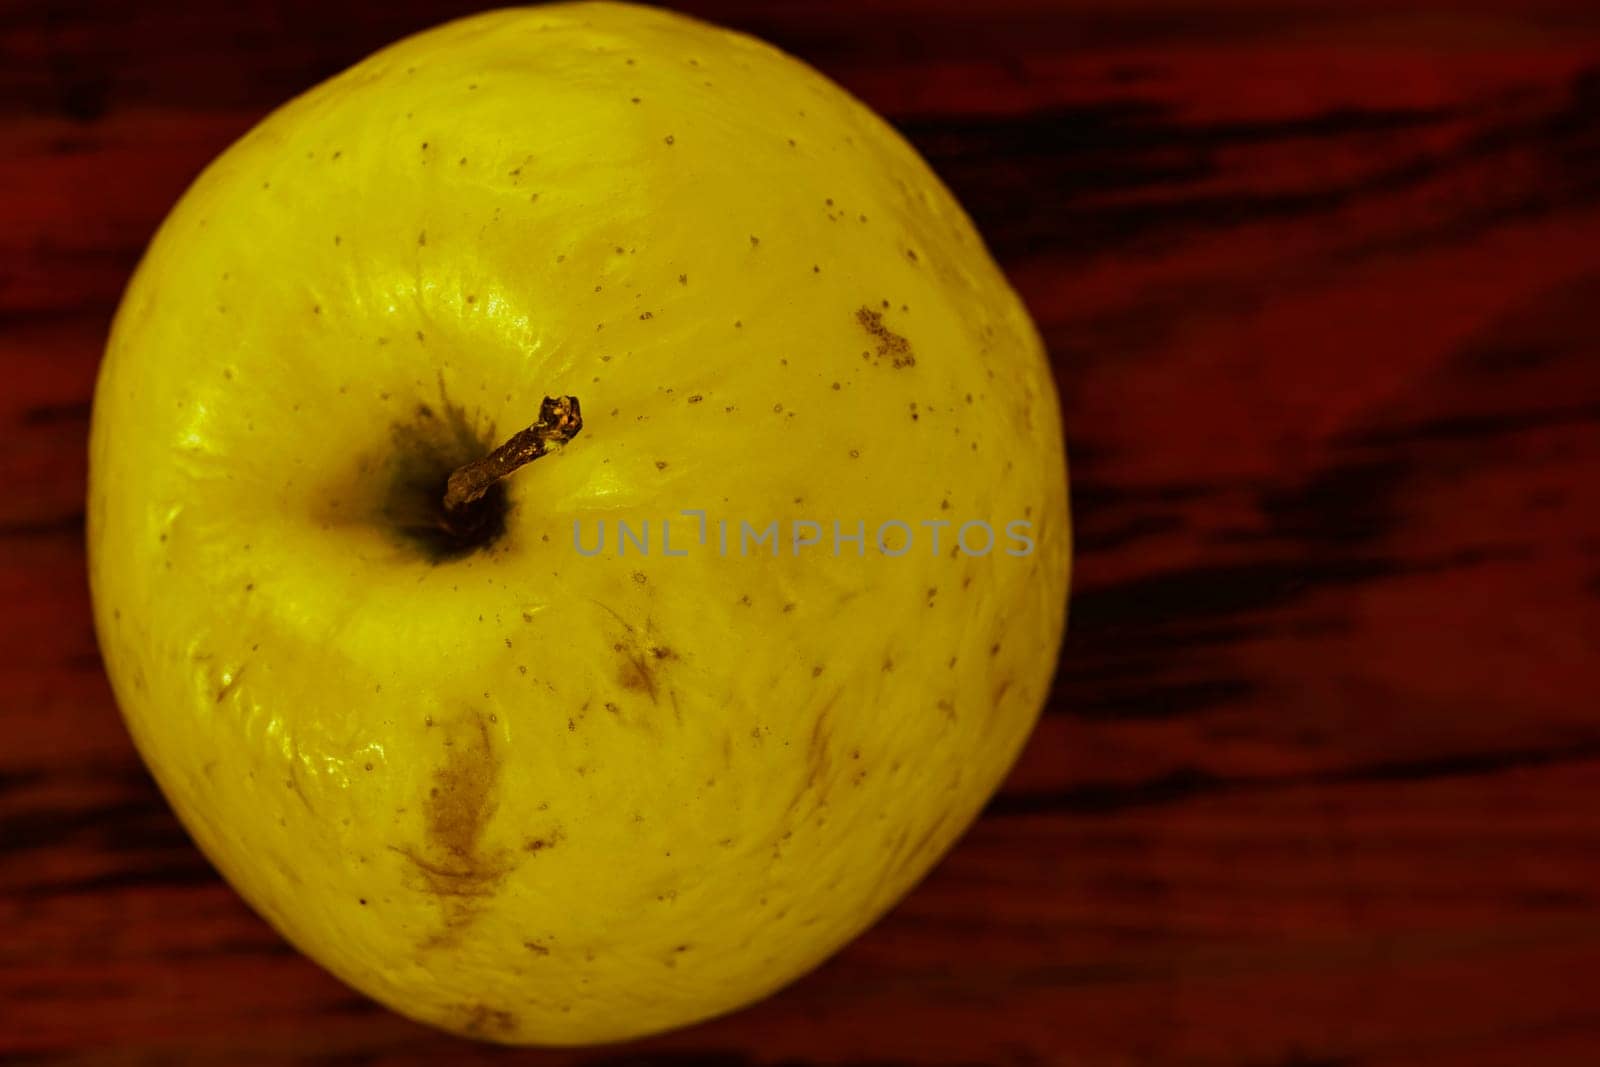 Yellow apple on colored background by victimewalker